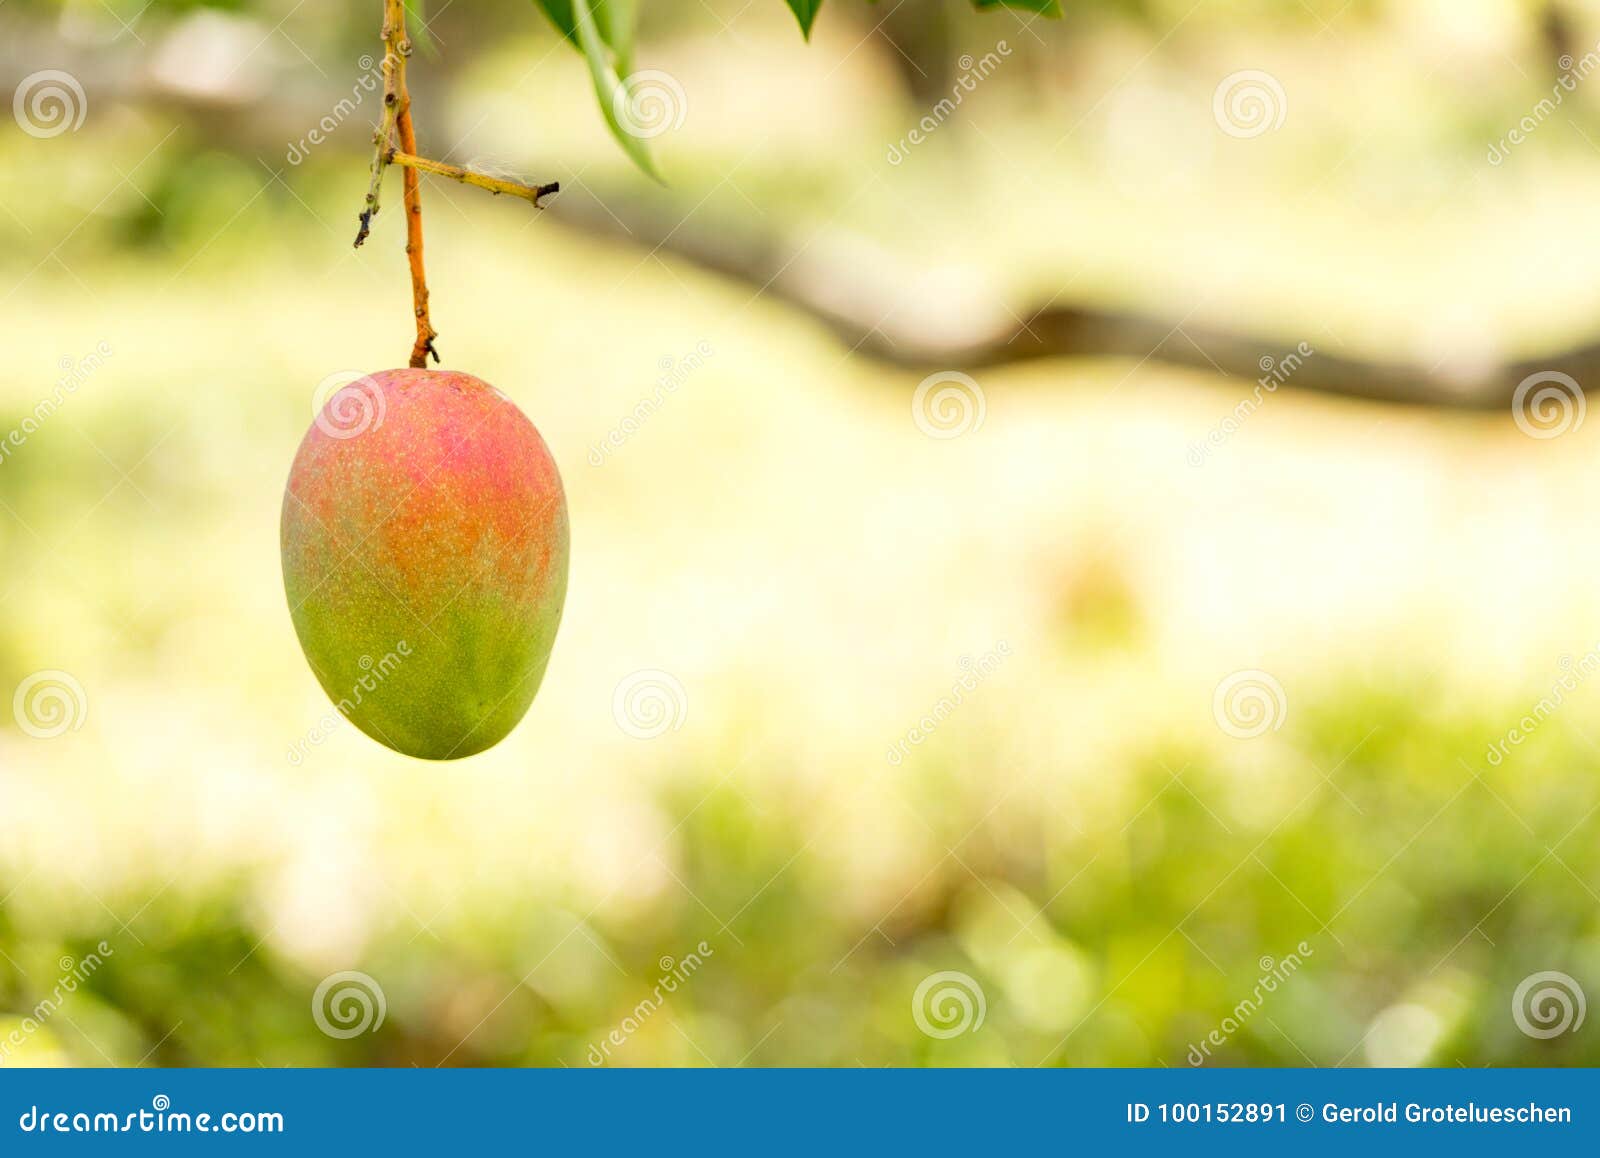 mango on a tree branch with a blurred background, vinales, pinar del rio, cuba. close-up. copy space for text.